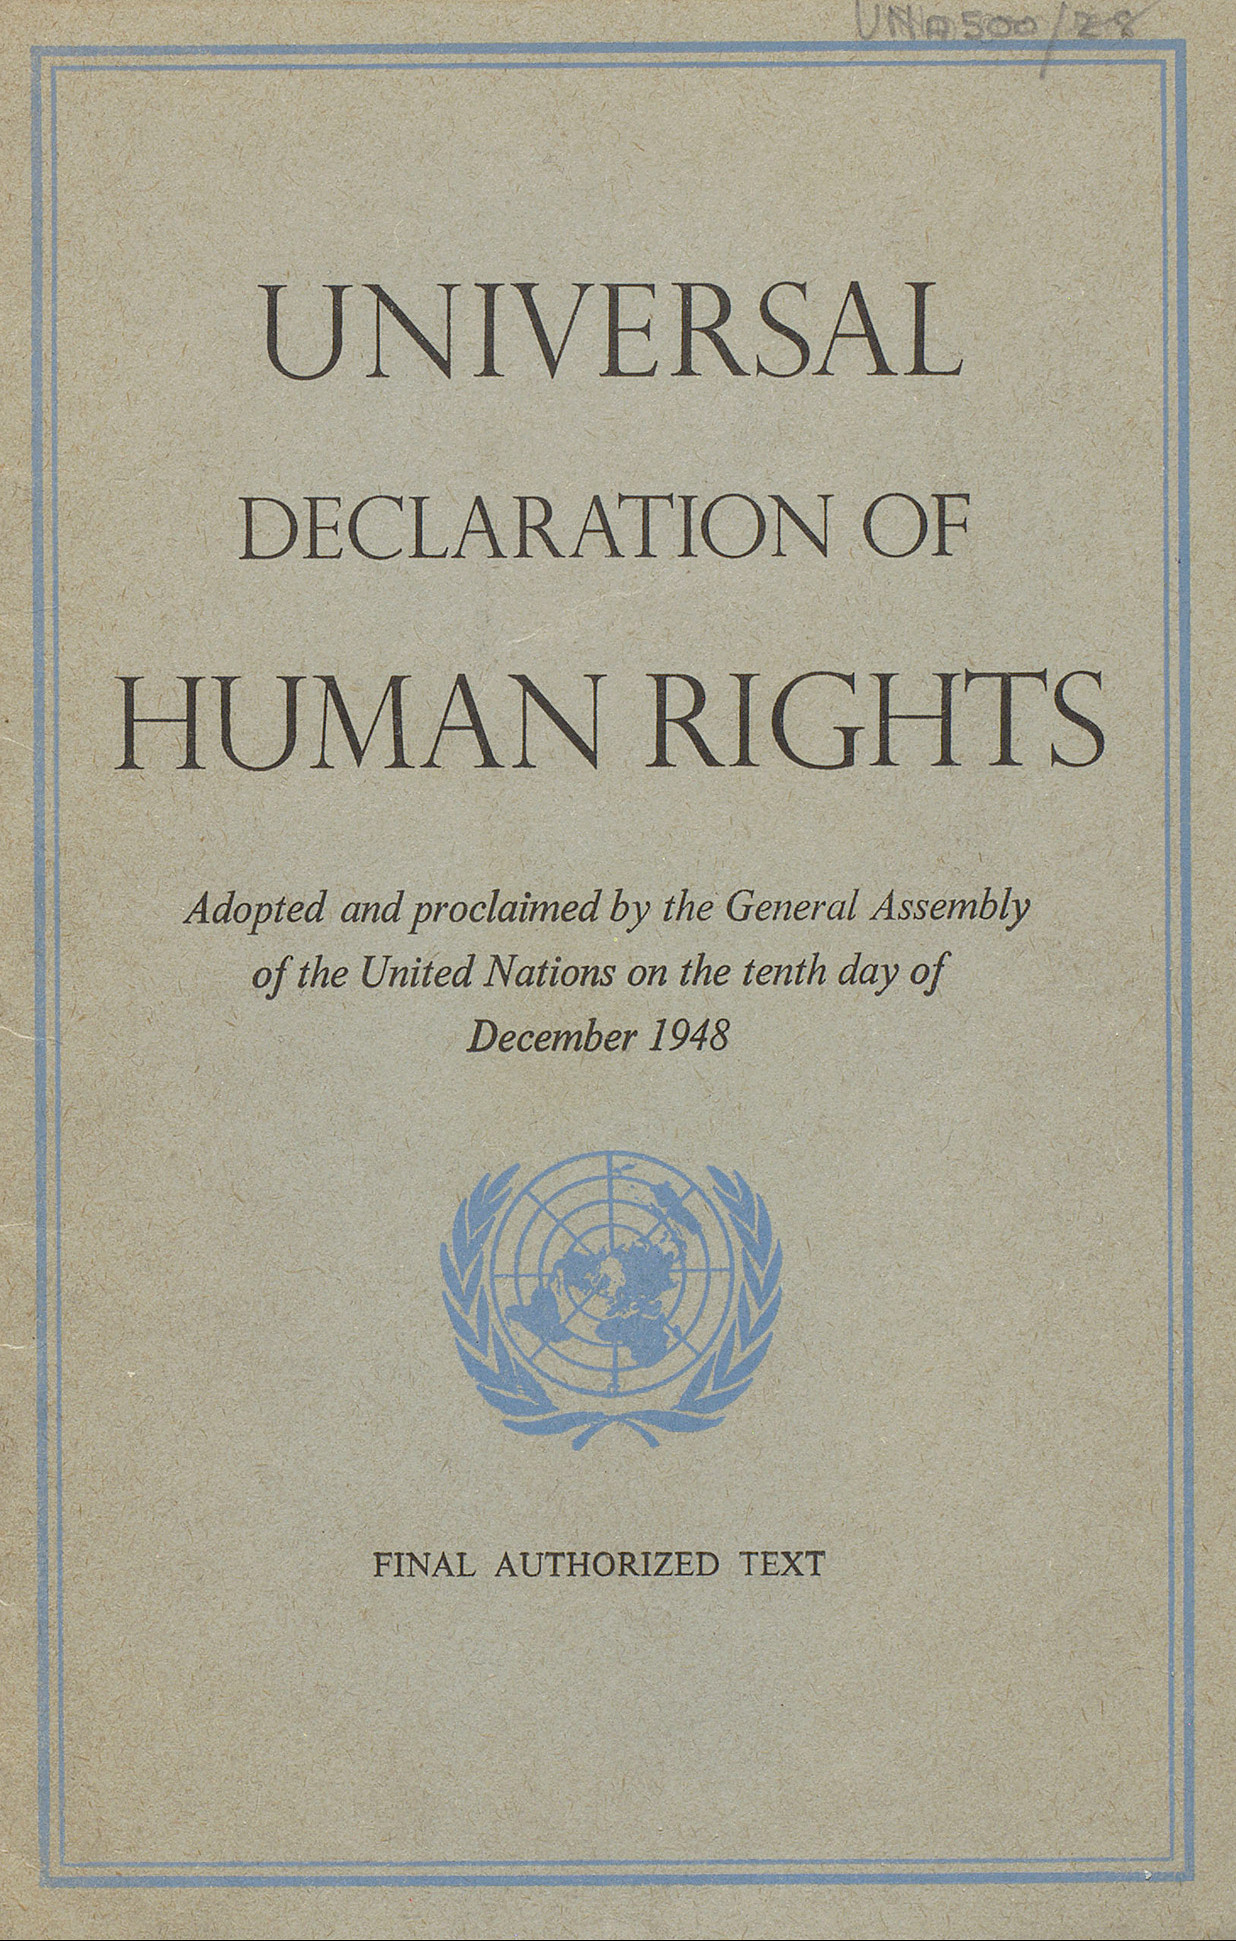 The cover page of the Universal Declaration of Human Rights